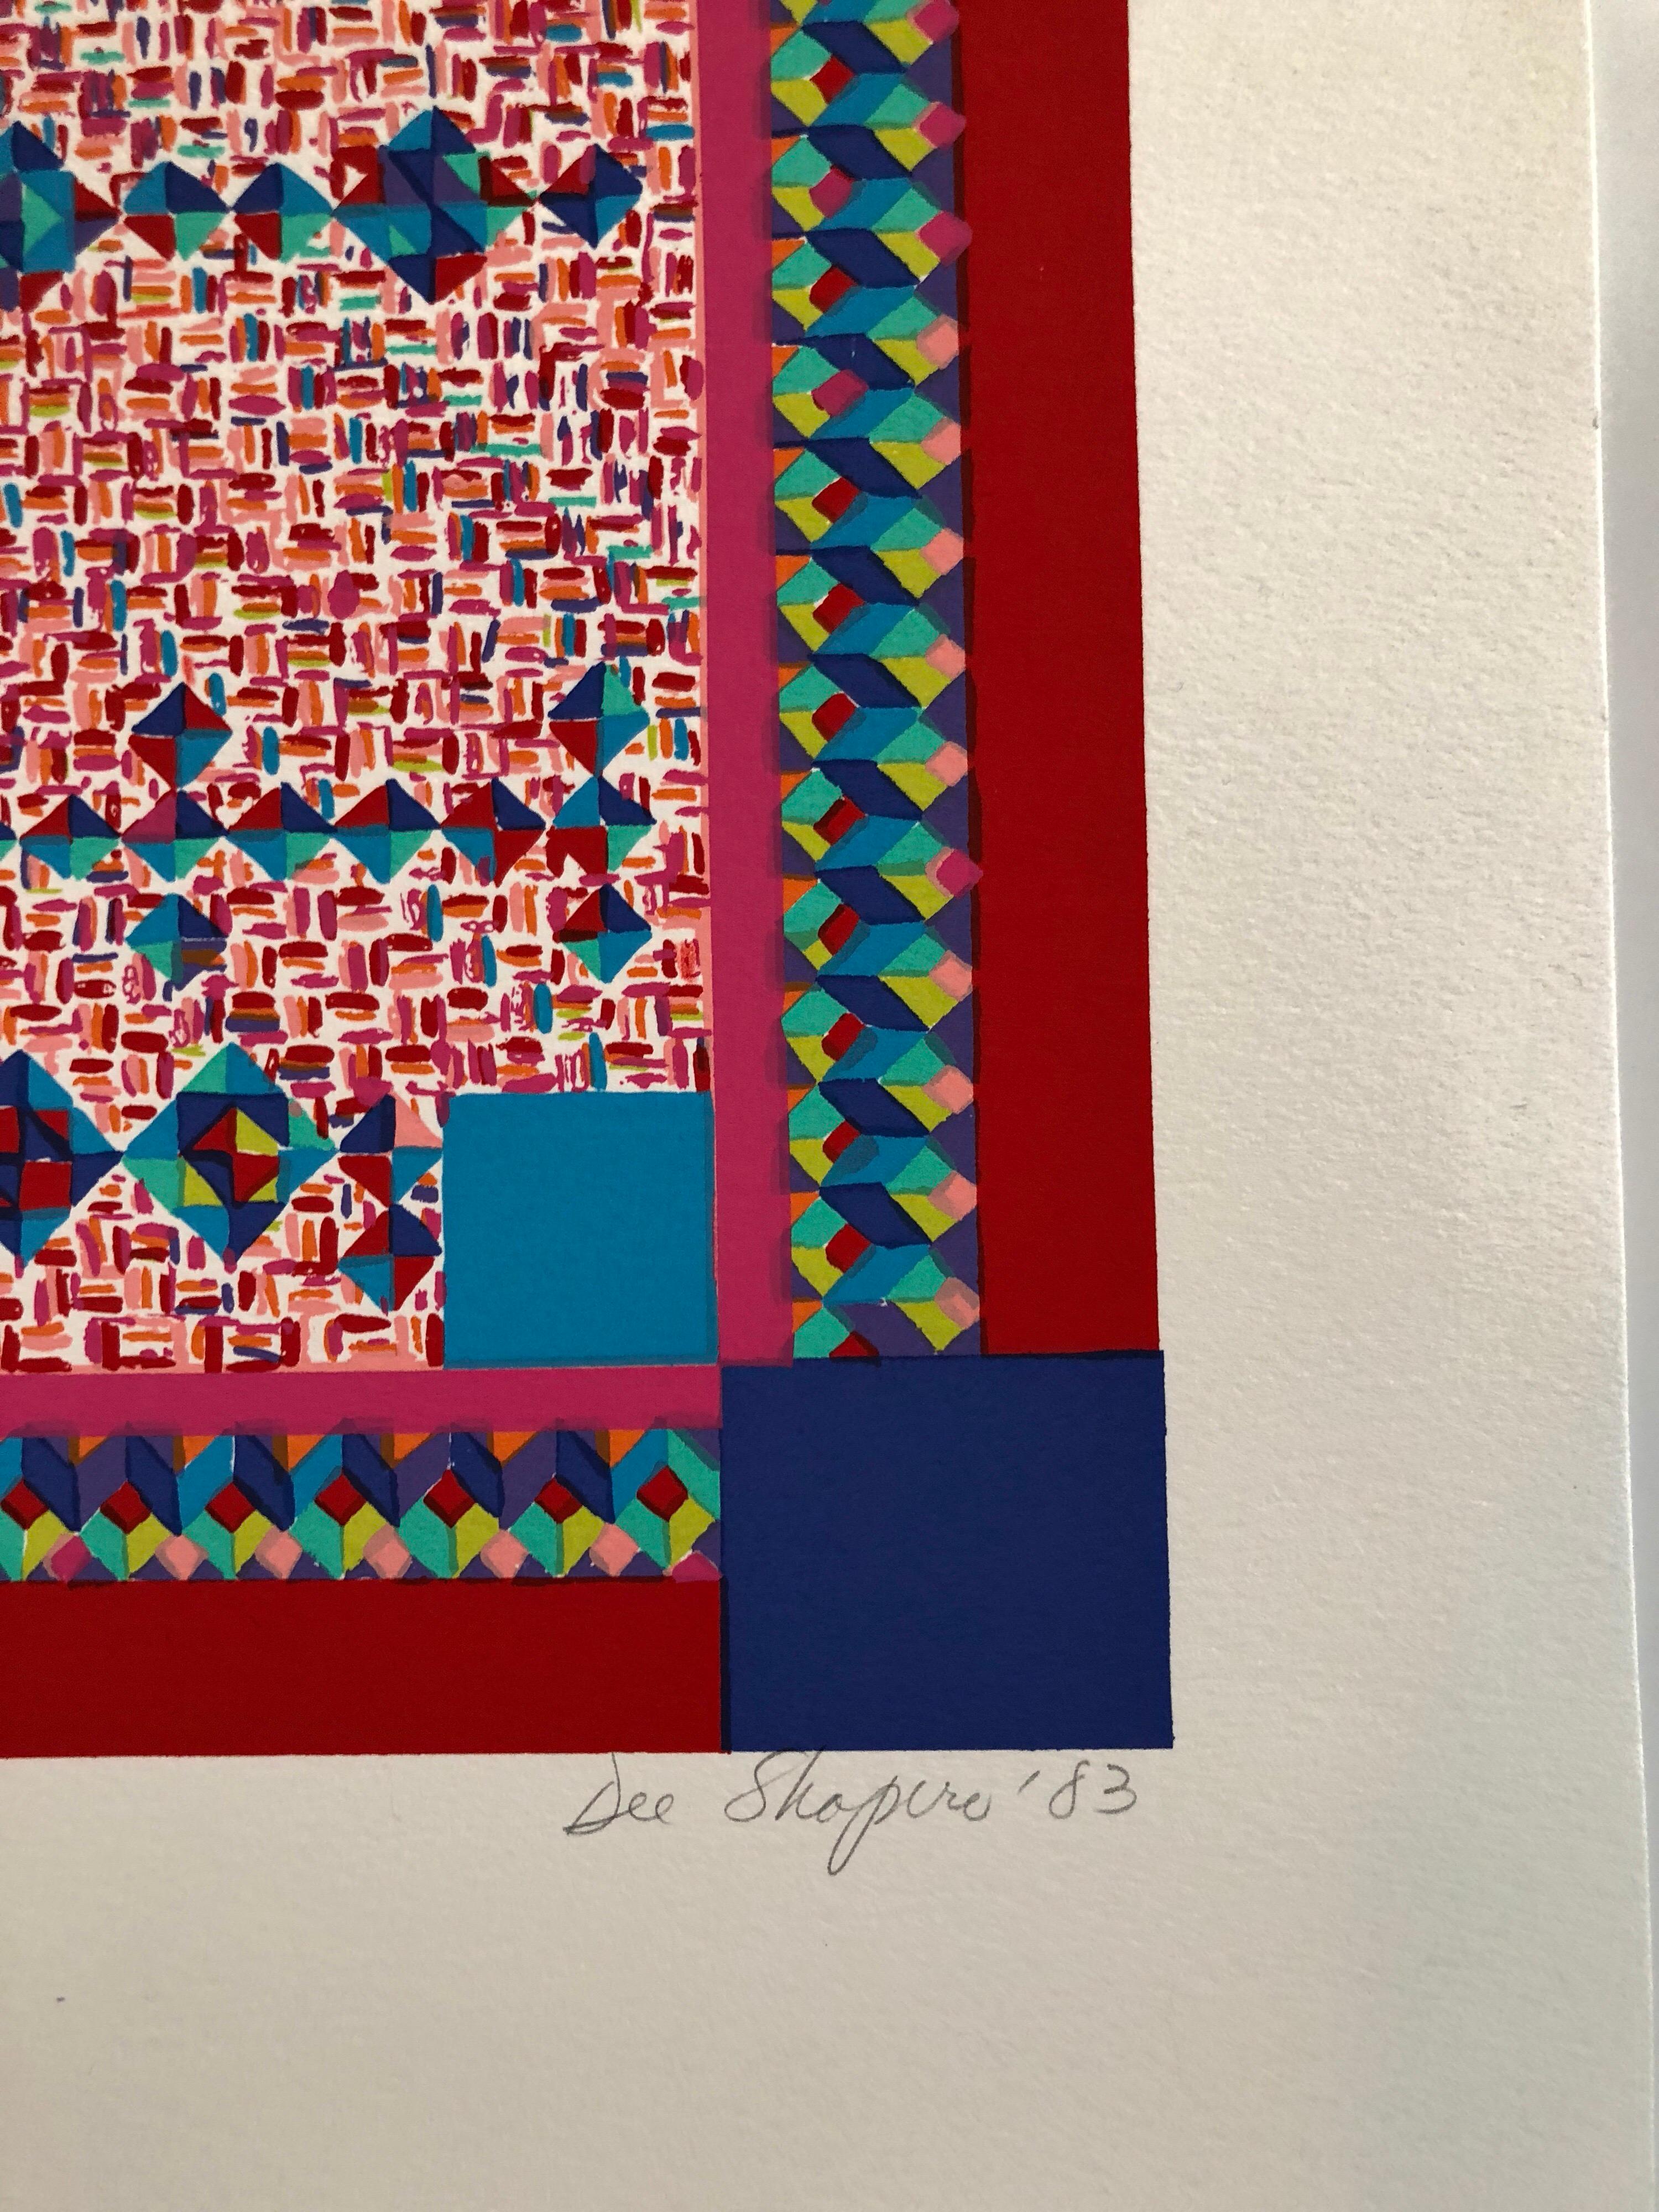 Dee Shapiro is a Contemporary American artist and writer associated with the Pattern and Decoration movement. I have seen this referred to as Hejaz.
Dee Shapiro was inspired to be an Artist in her early years of education. Dee's career started in